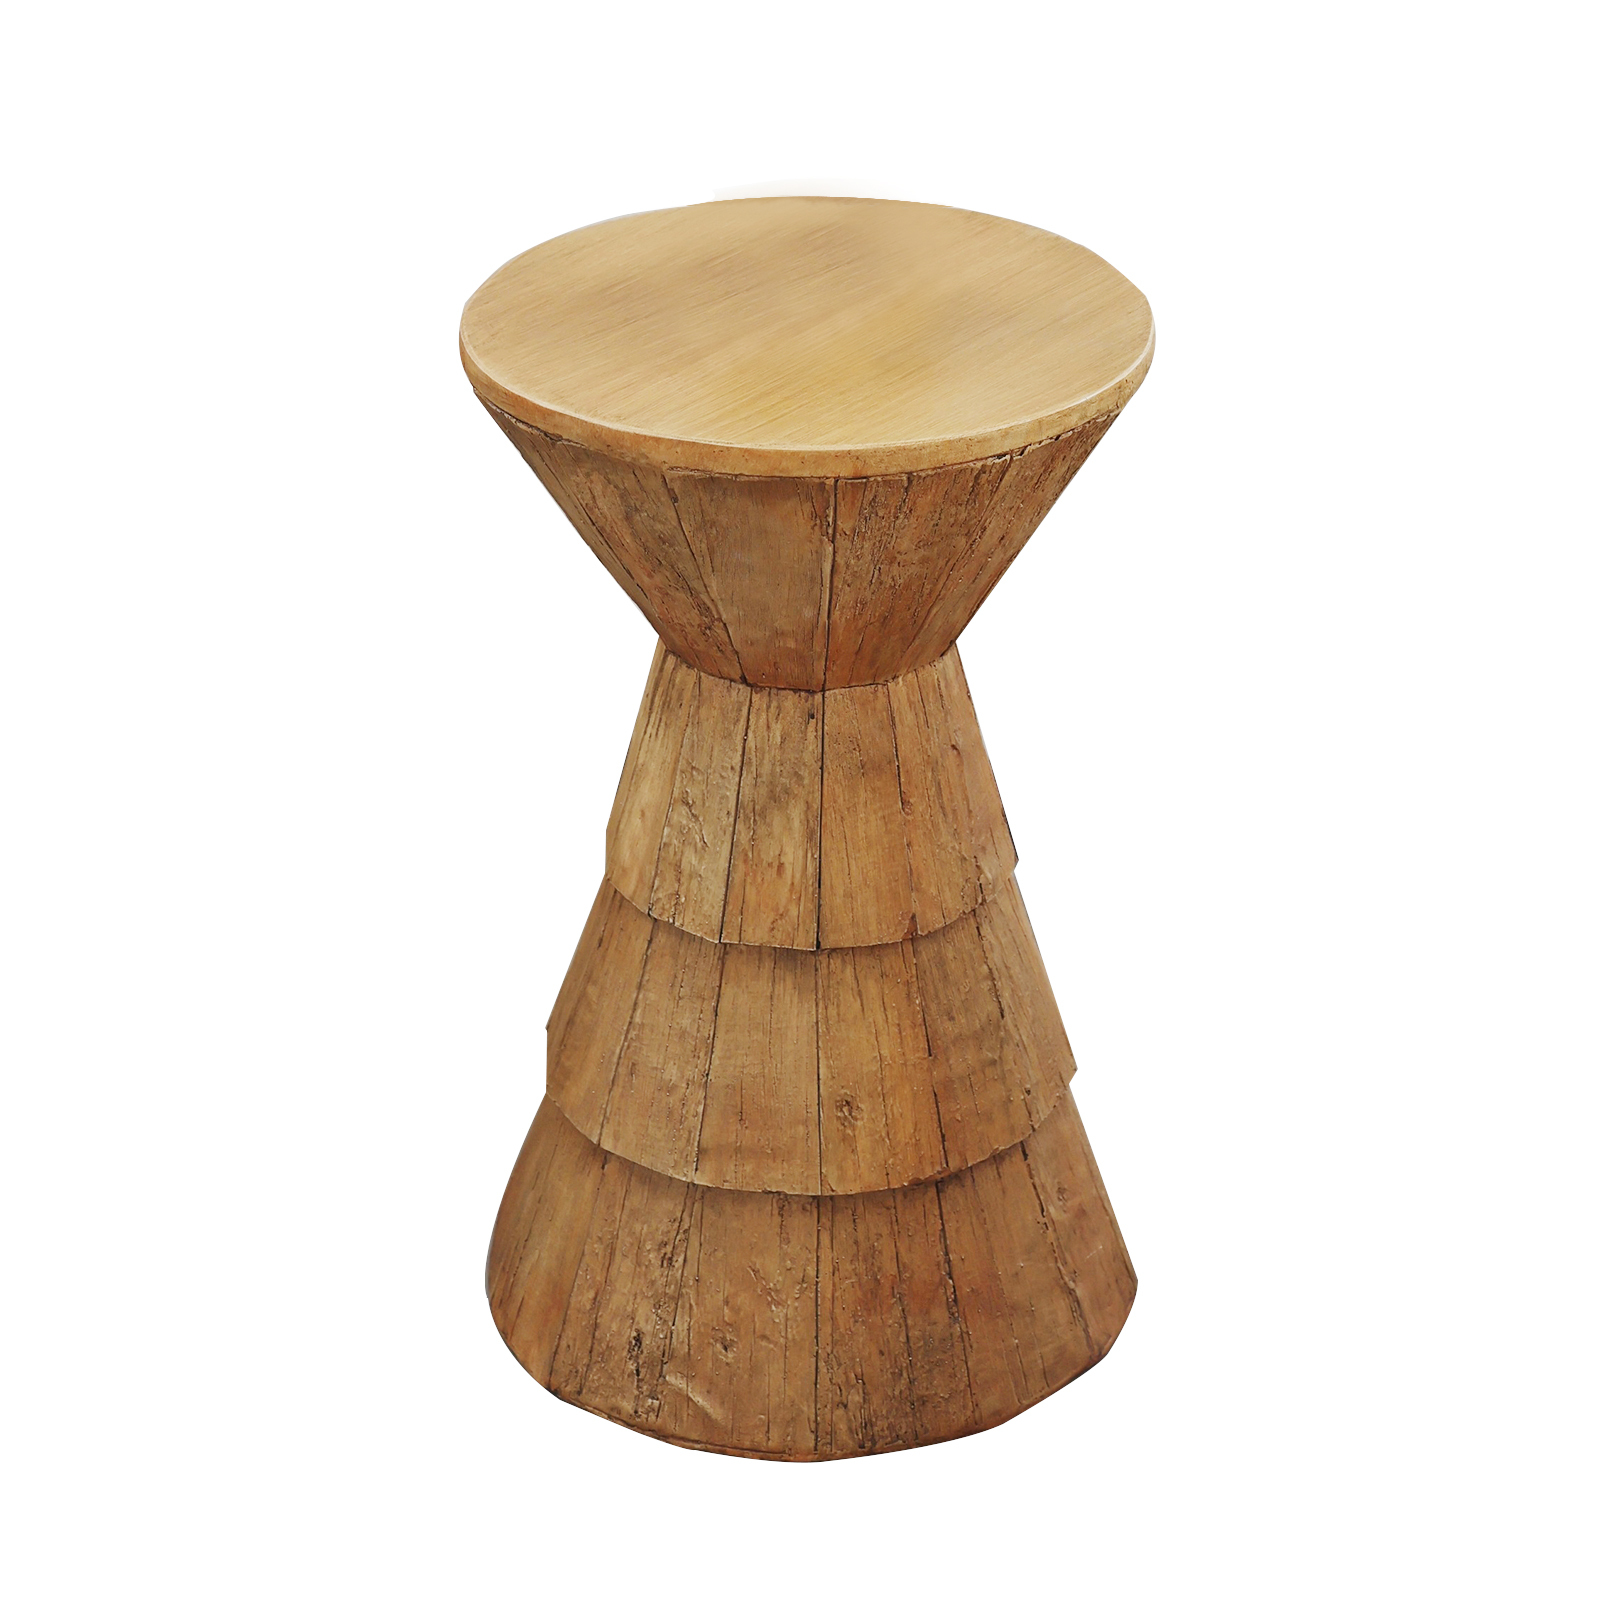 Round Faux Wood Coffee Table Concrete Side Table 31 x 31 x 52cm